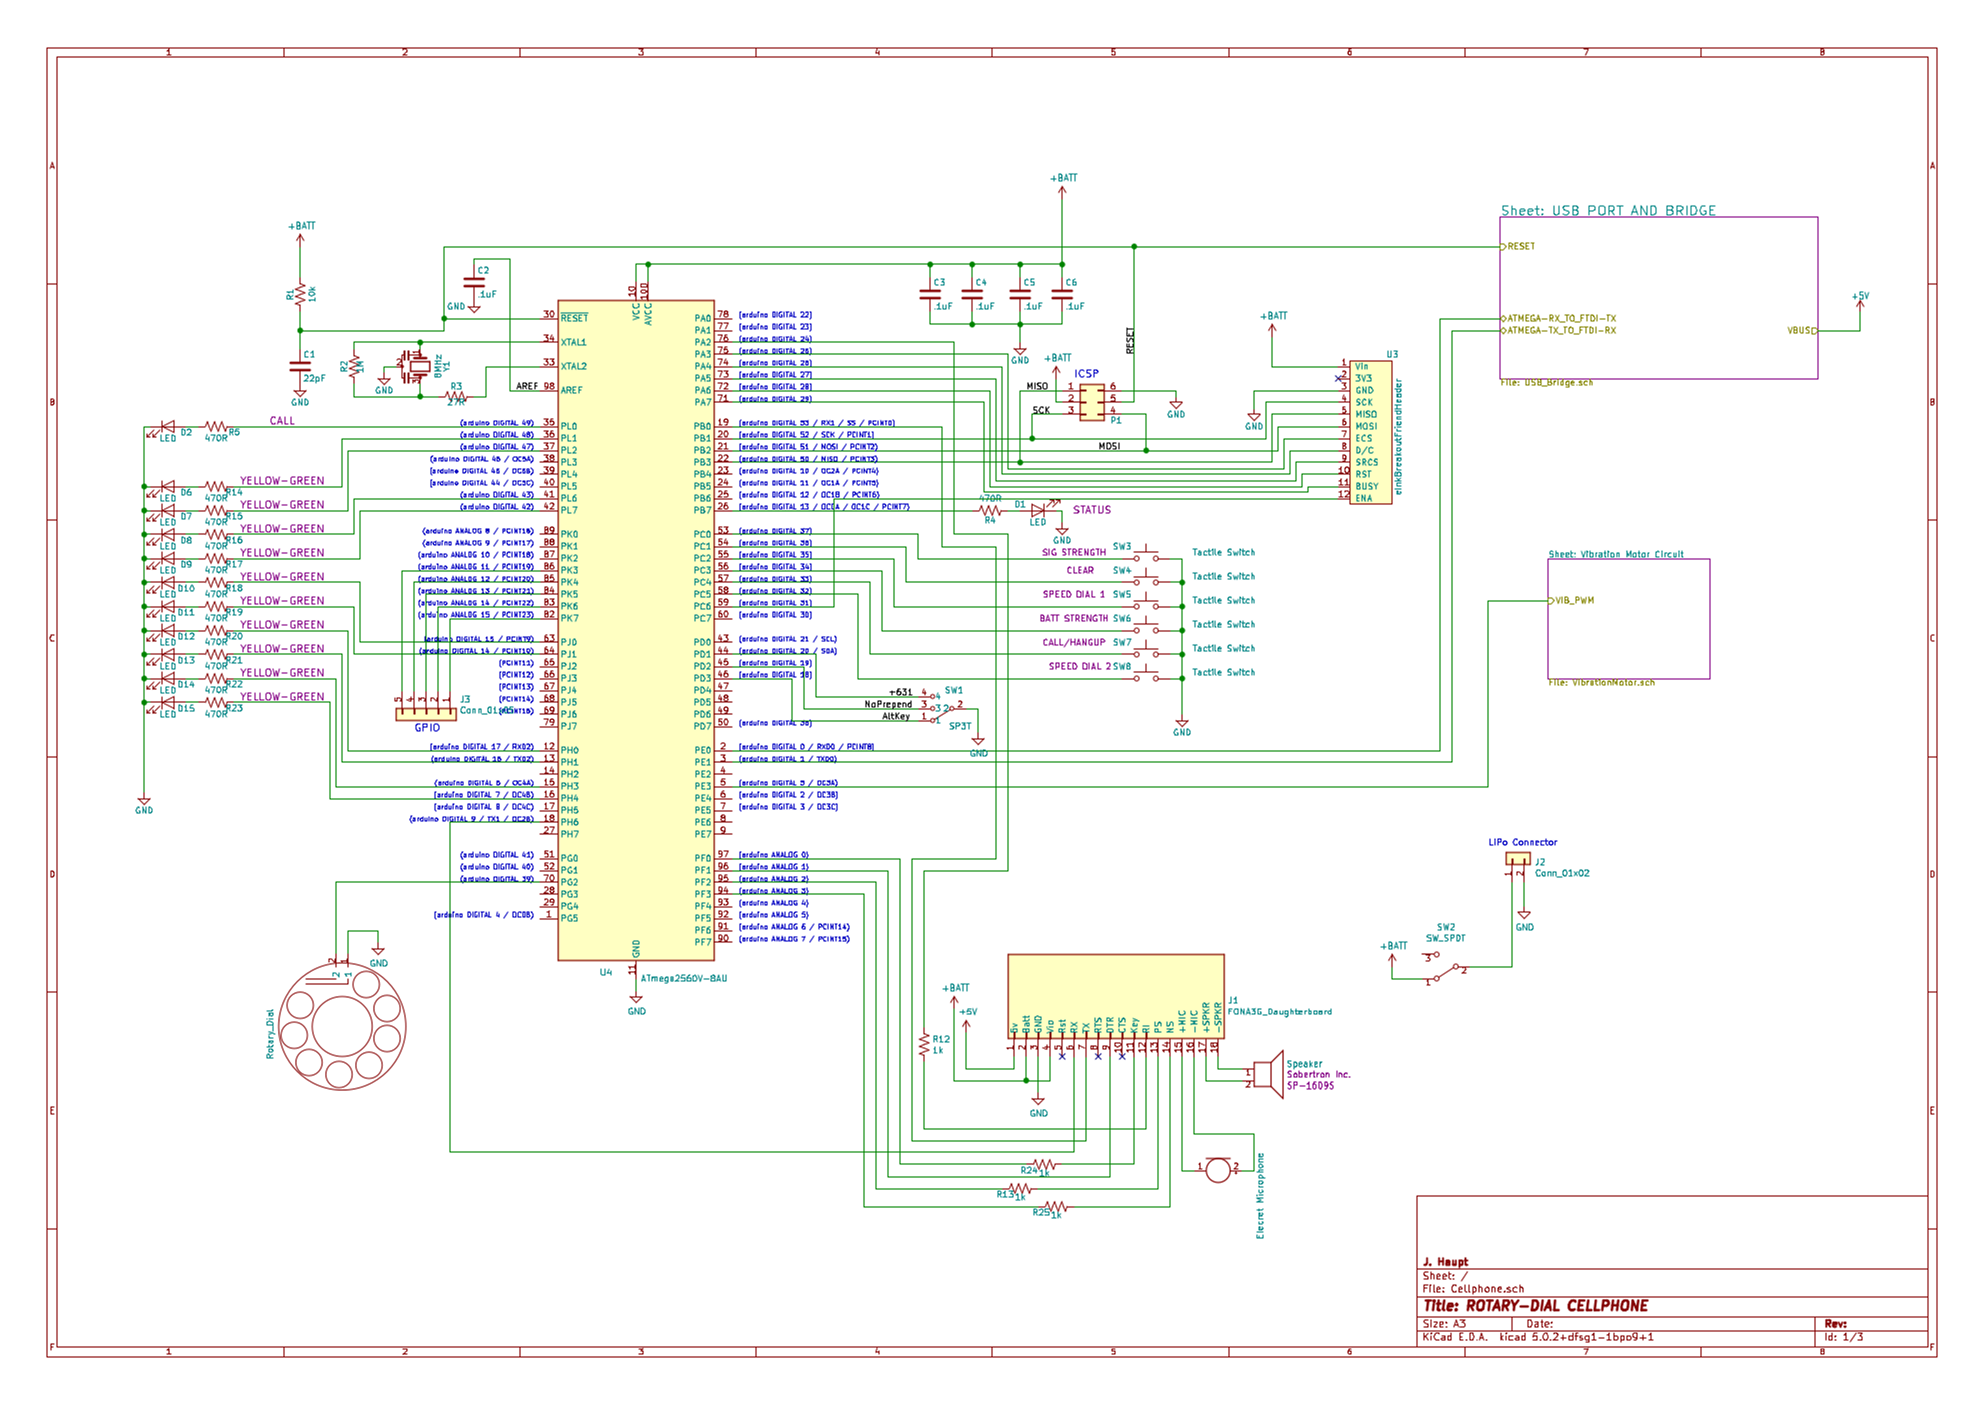 RotaryCellphone_Schematic_TopLevel.png